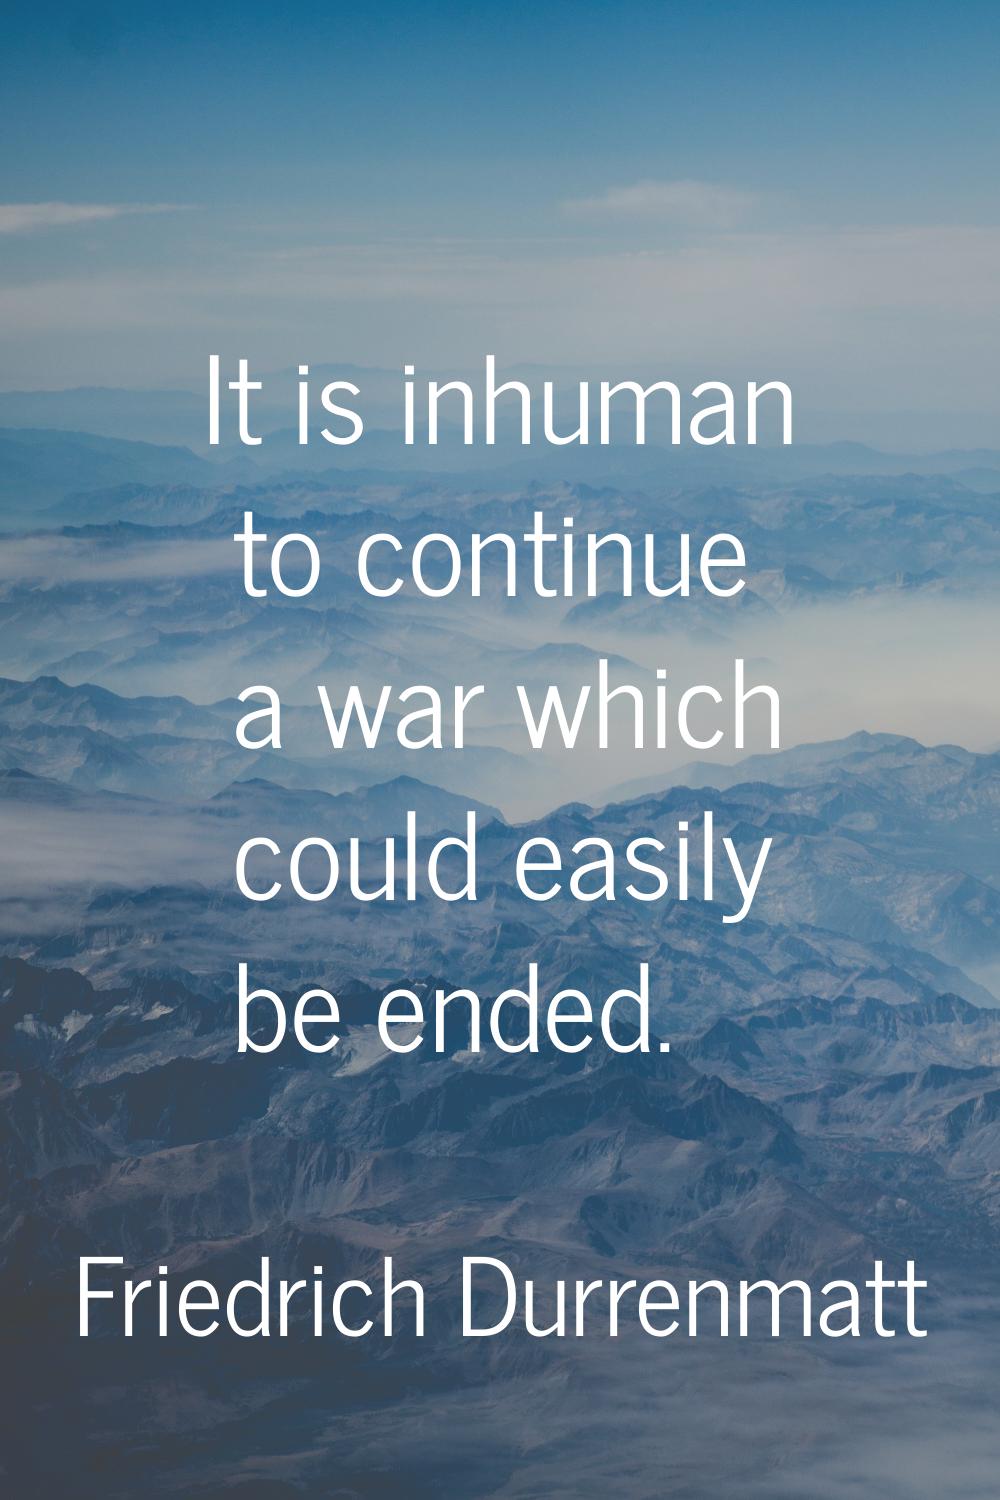 It is inhuman to continue a war which could easily be ended.